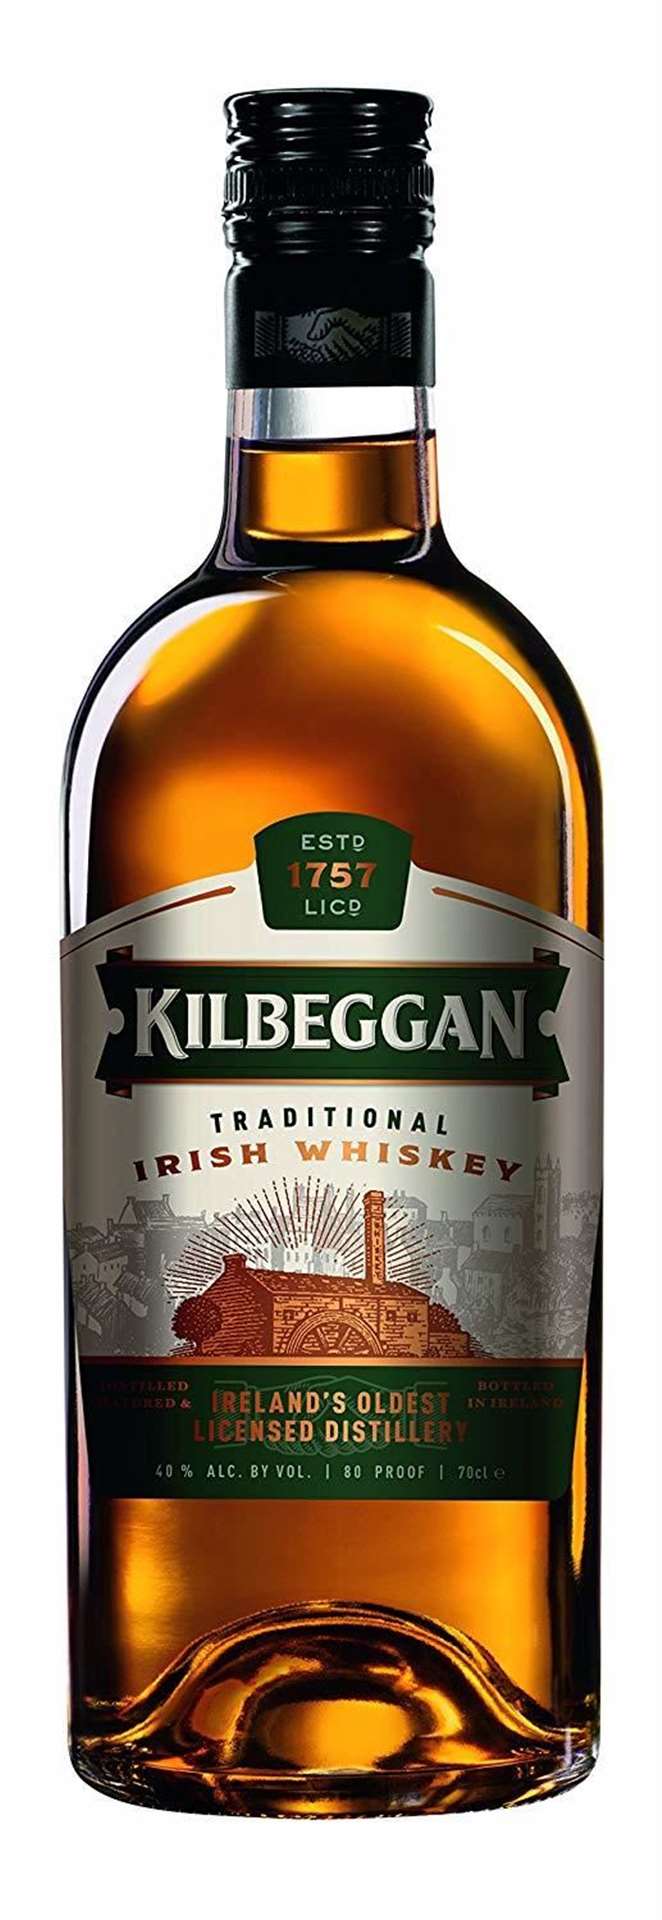 You can make a saving of £10.90 if you buy this bottle of Kilbeggan Irish Whisky 70 cl!